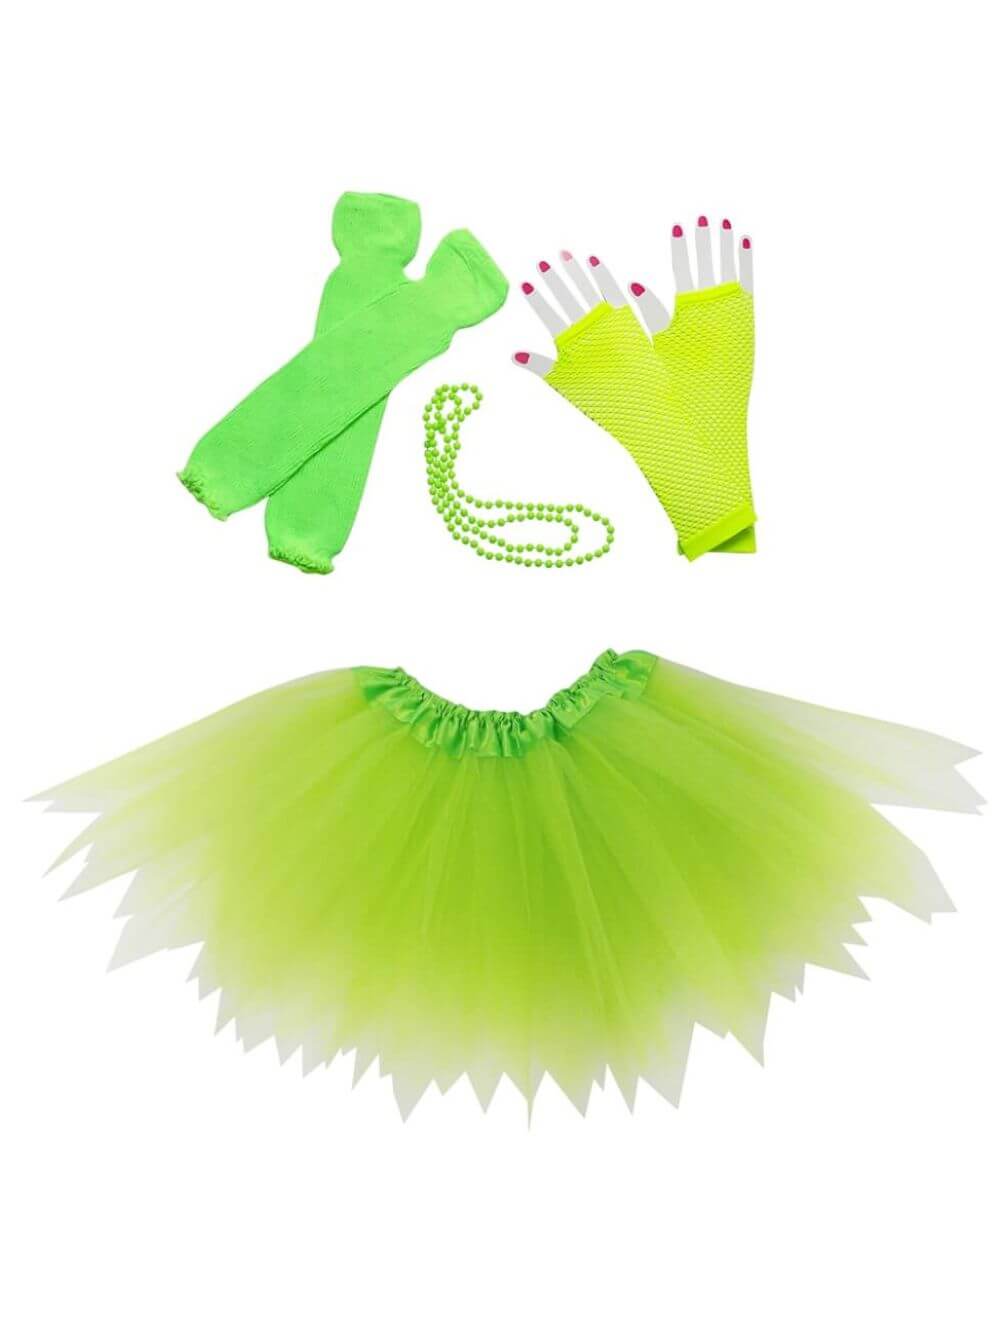 80s Costume in Neon Lime Green - 4 Piece Pixie Tutu Set for Girls, Adult, & Plus Sizes - Sydney So Sweet